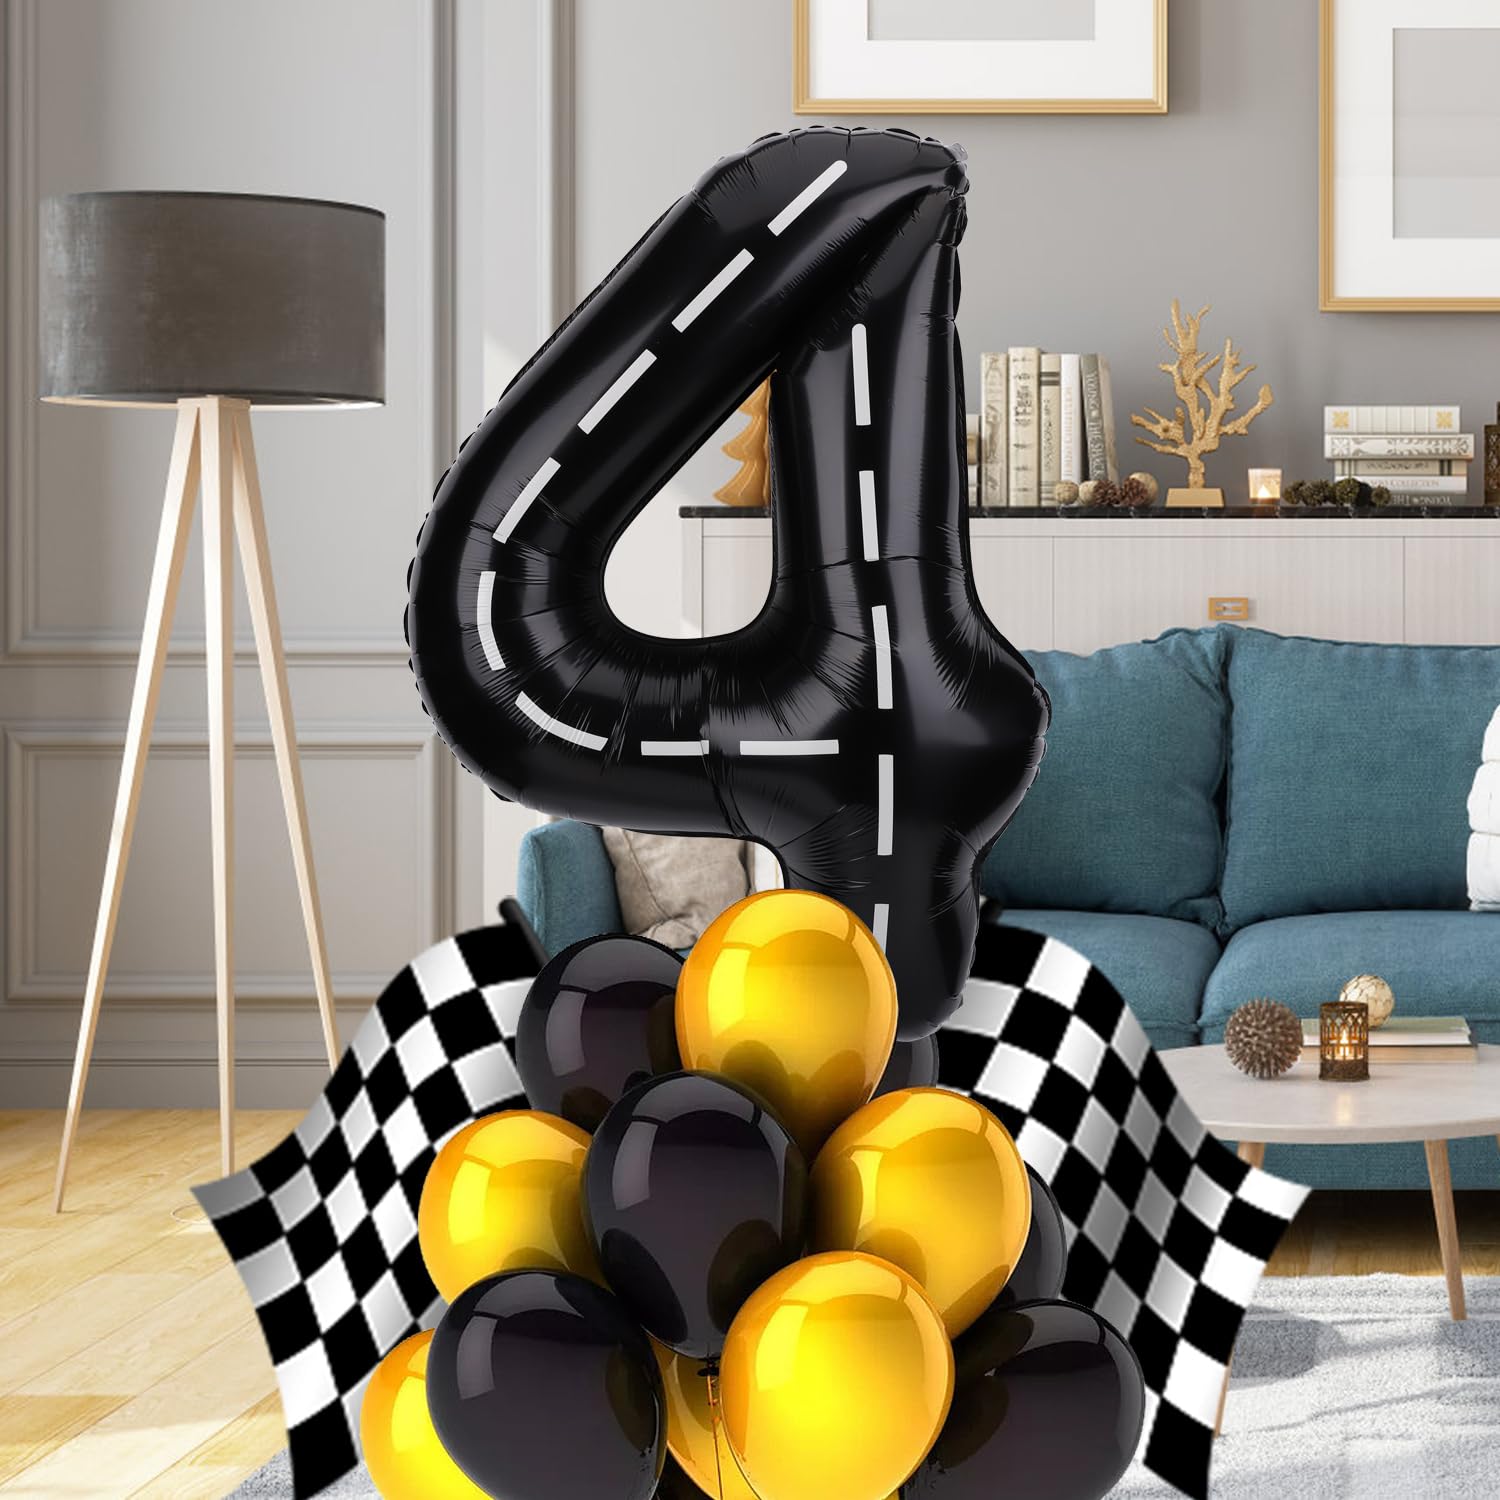 Race Car Balloon Number, 40 Inches Large Black Racetrack Number Balloon Race Car Birthday Balloons Race Car Theme Party Decorations for Boys' Birthday Party Baby Shower(4)